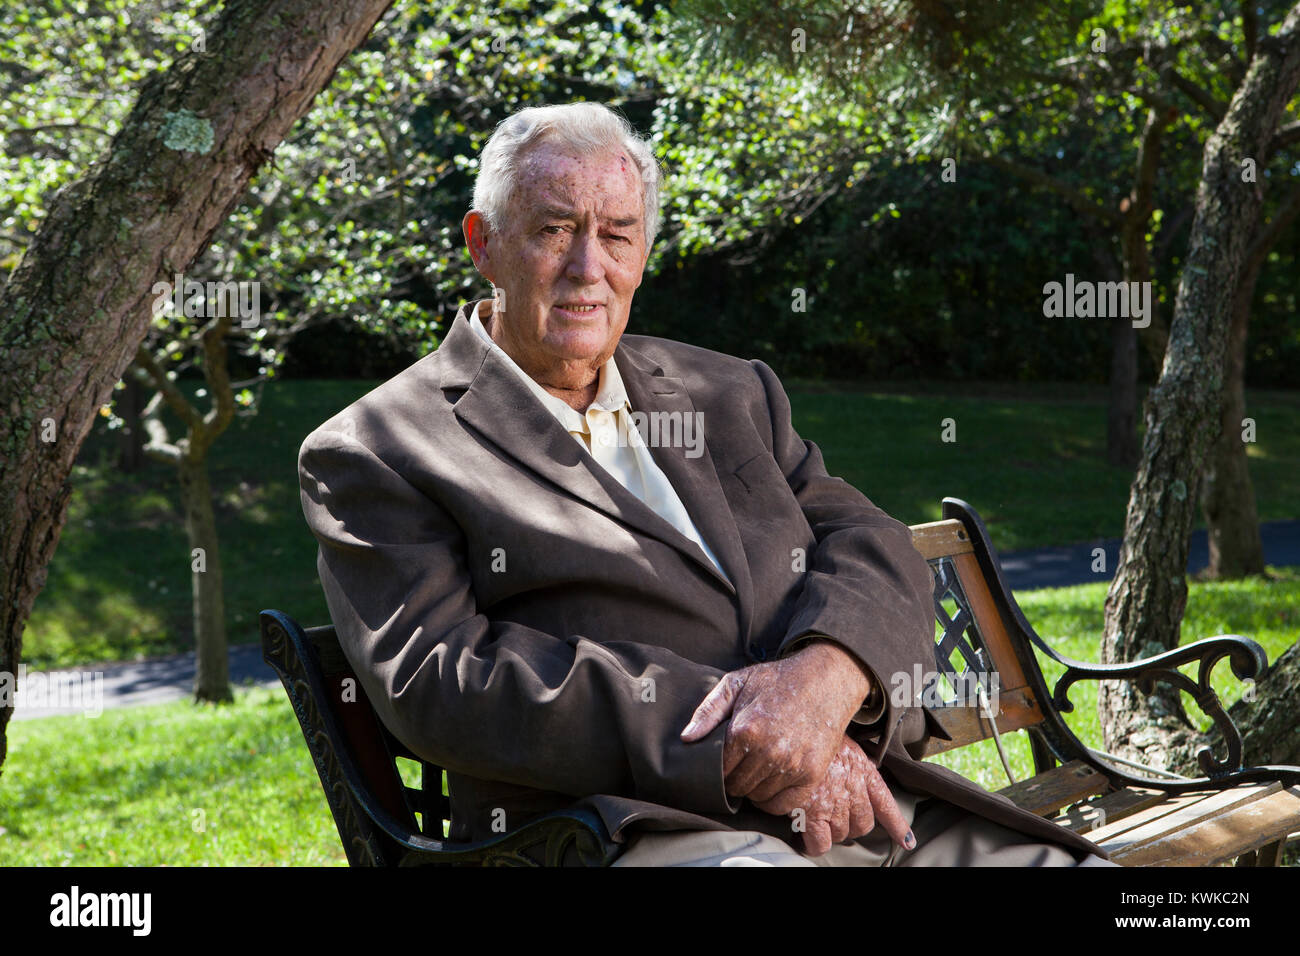 Richard Leakey, paleoanthropologist, conservationist, and professor of anthropology at Stony Brook, where he is Chair of the Turkana Basin Institute. Stock Photo